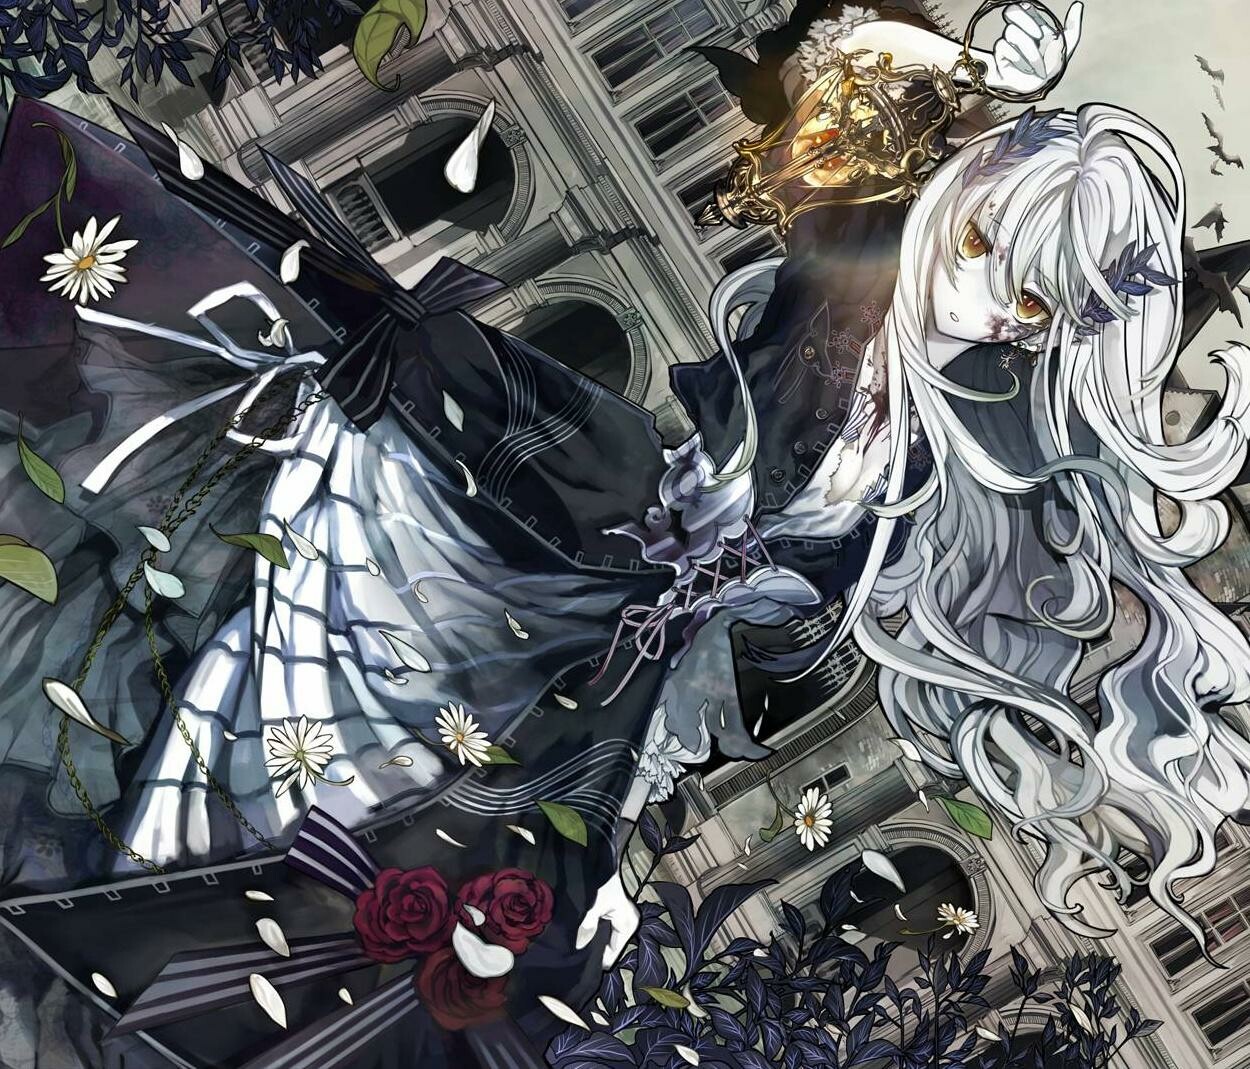 Gothic Anime Wallpapers (38+ images inside)